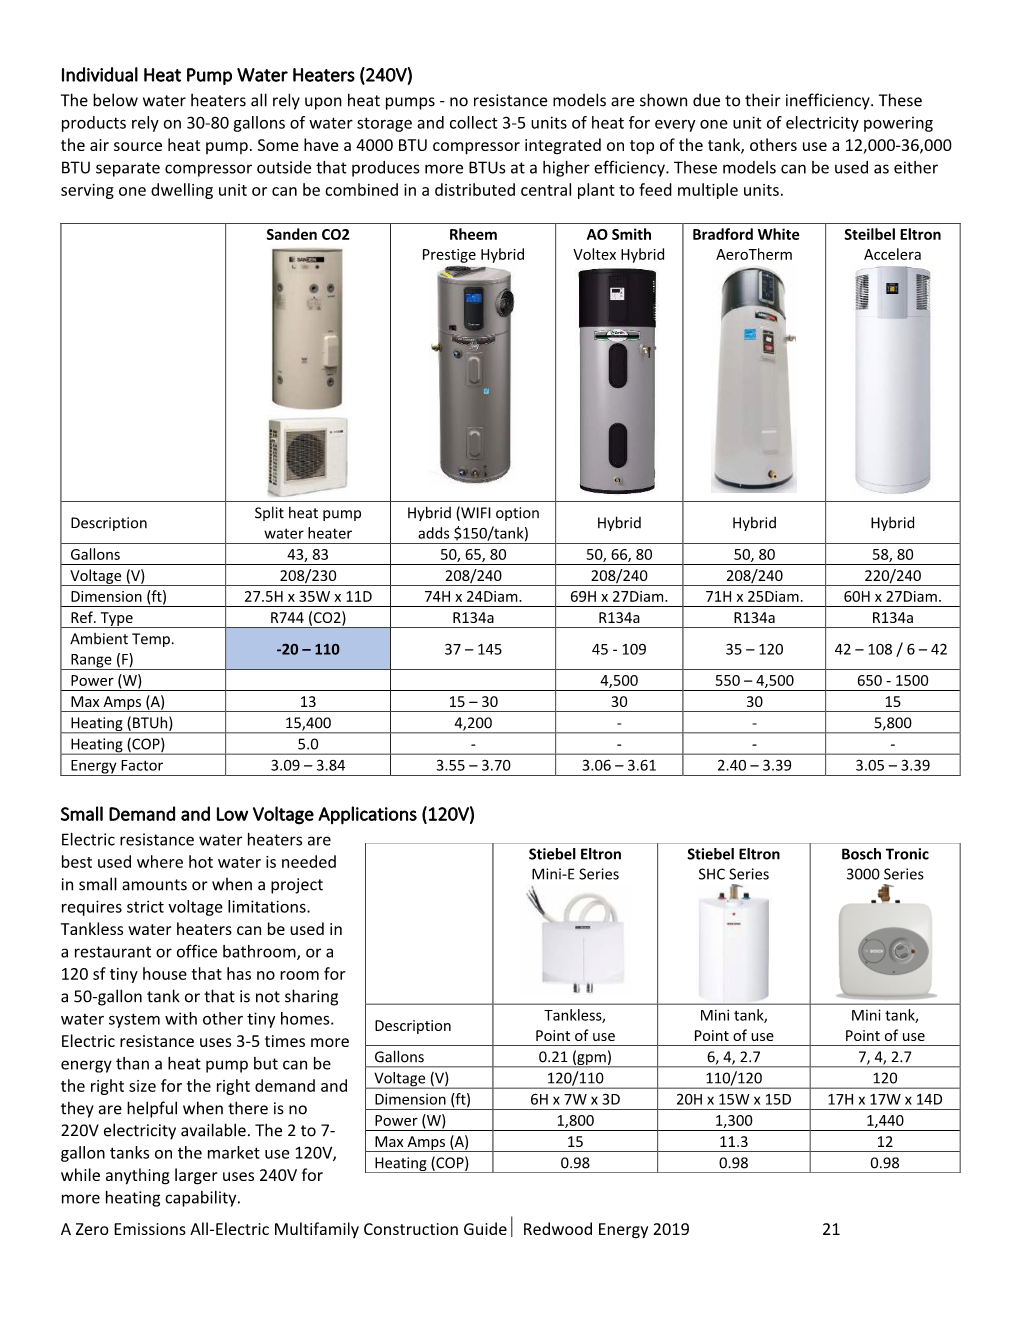 Individual Heat Pump Water Heaters (240V) Small Demand and Low Voltage Applications (120V)